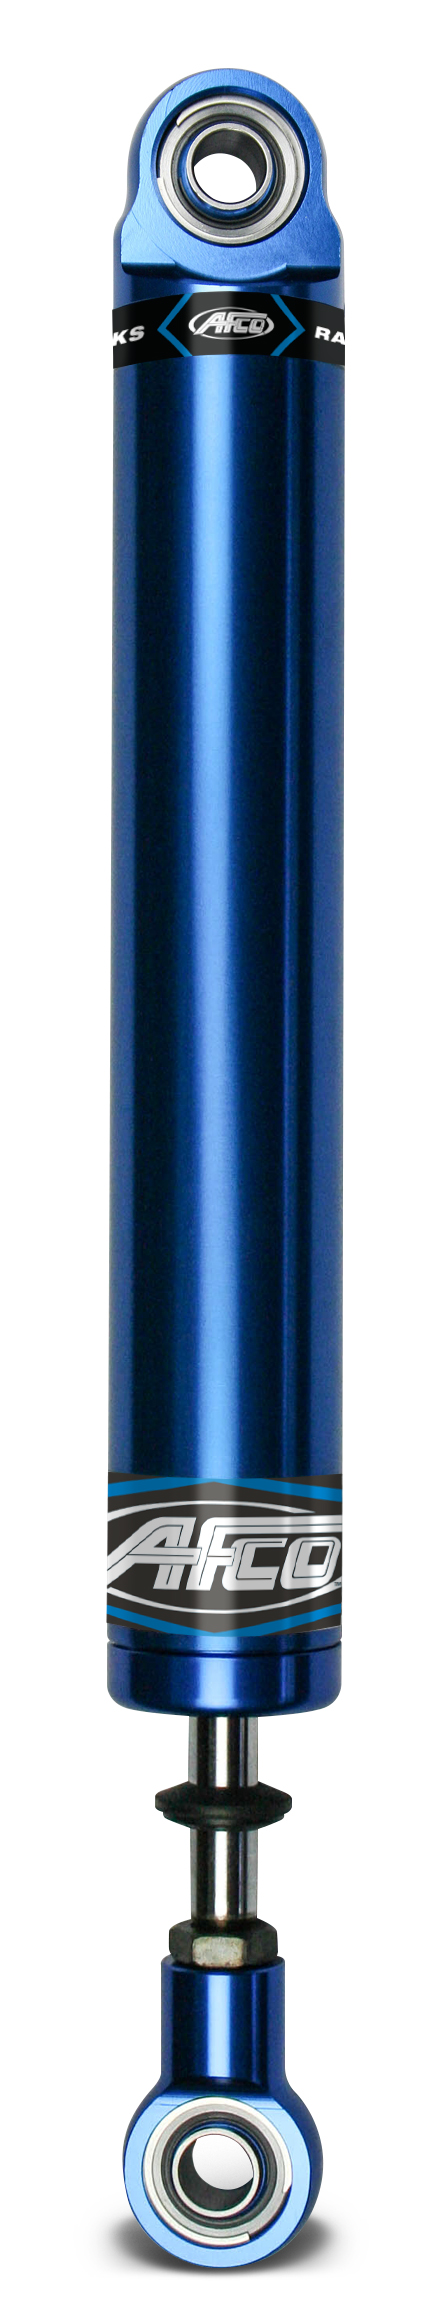 Aluminum Shock Twin Tube 16 Series Small Body 6 Inch Comp 2/Reb 2-5 Smooth